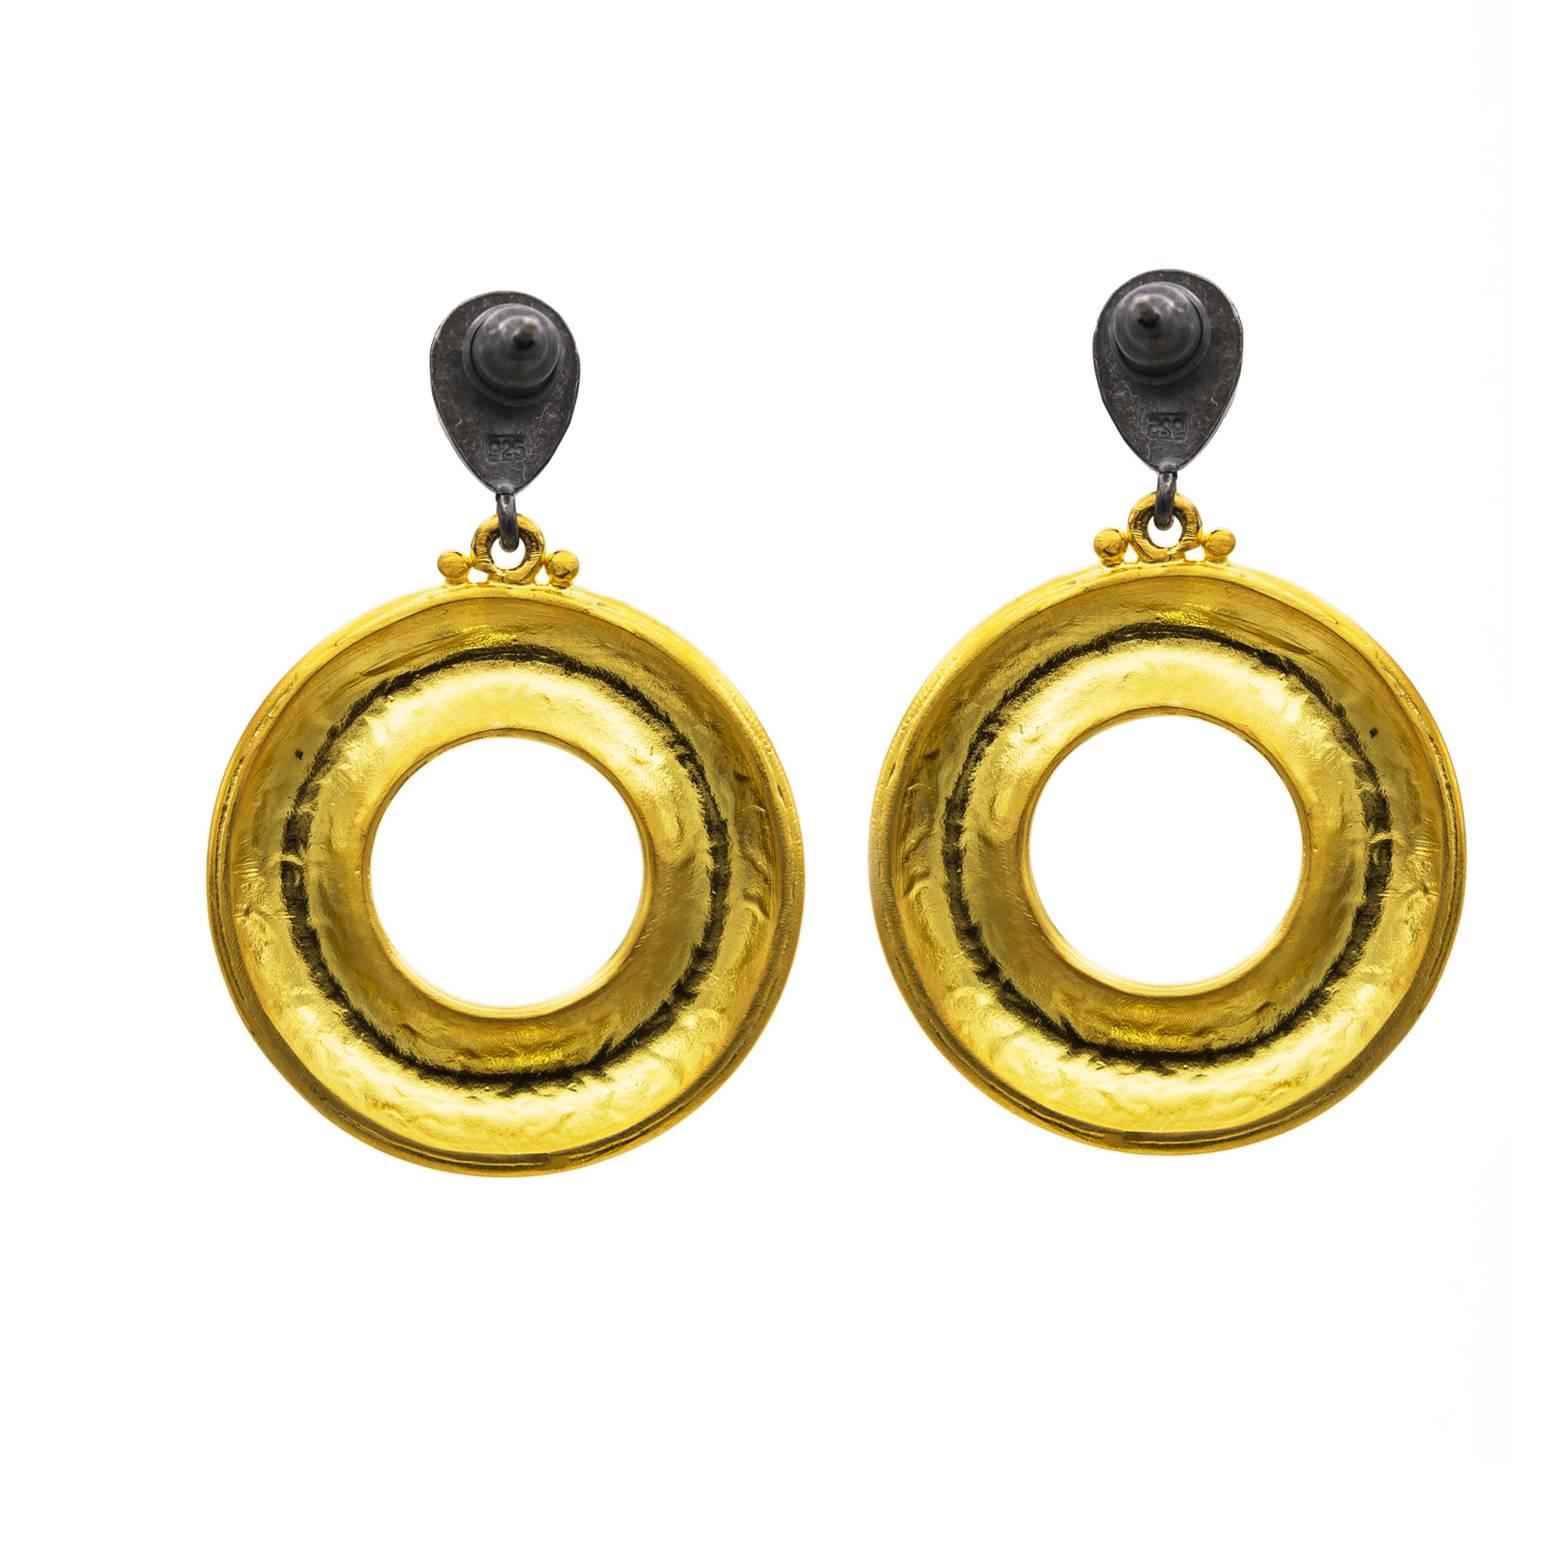 These gorgeous extra thick gold vermeil large hoop earrings dangle from an oxidized sterling silver drop and swing with your unique movement. The hammered texture gives them an elegance and shine that absorbs and reflects the subtlest of light. It's